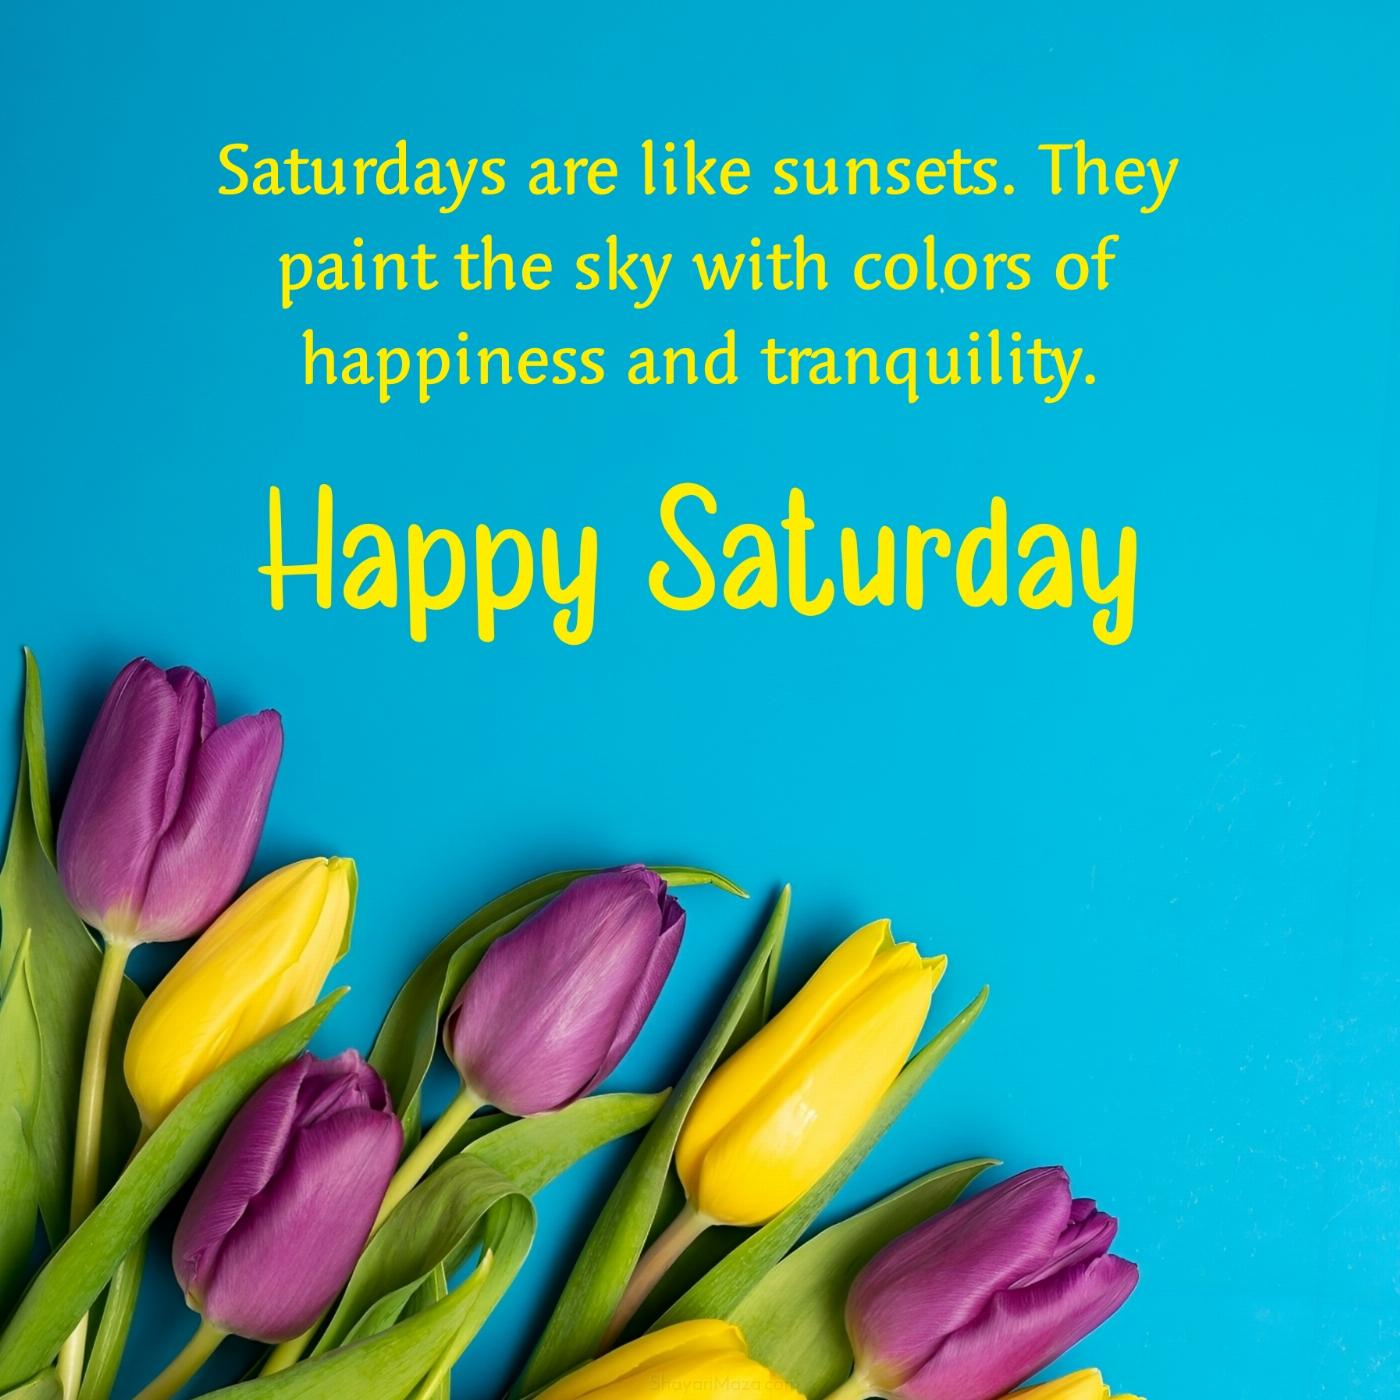 Saturdays are like sunsets They paint the sky with colors